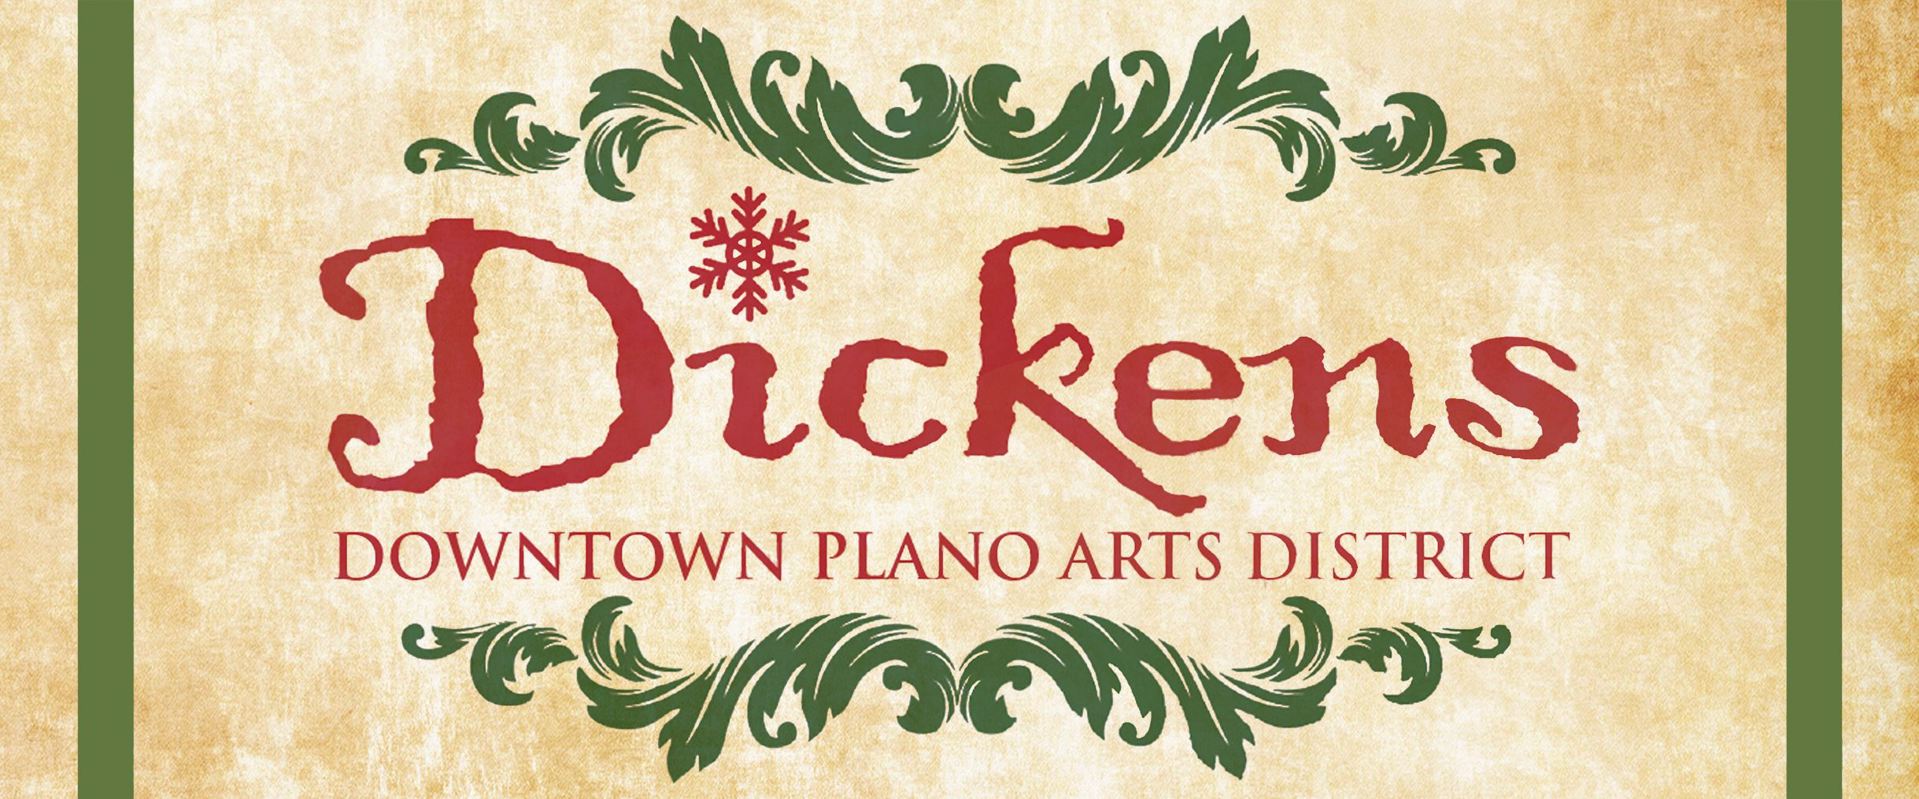 Dickens in Downtown Plano Arts District